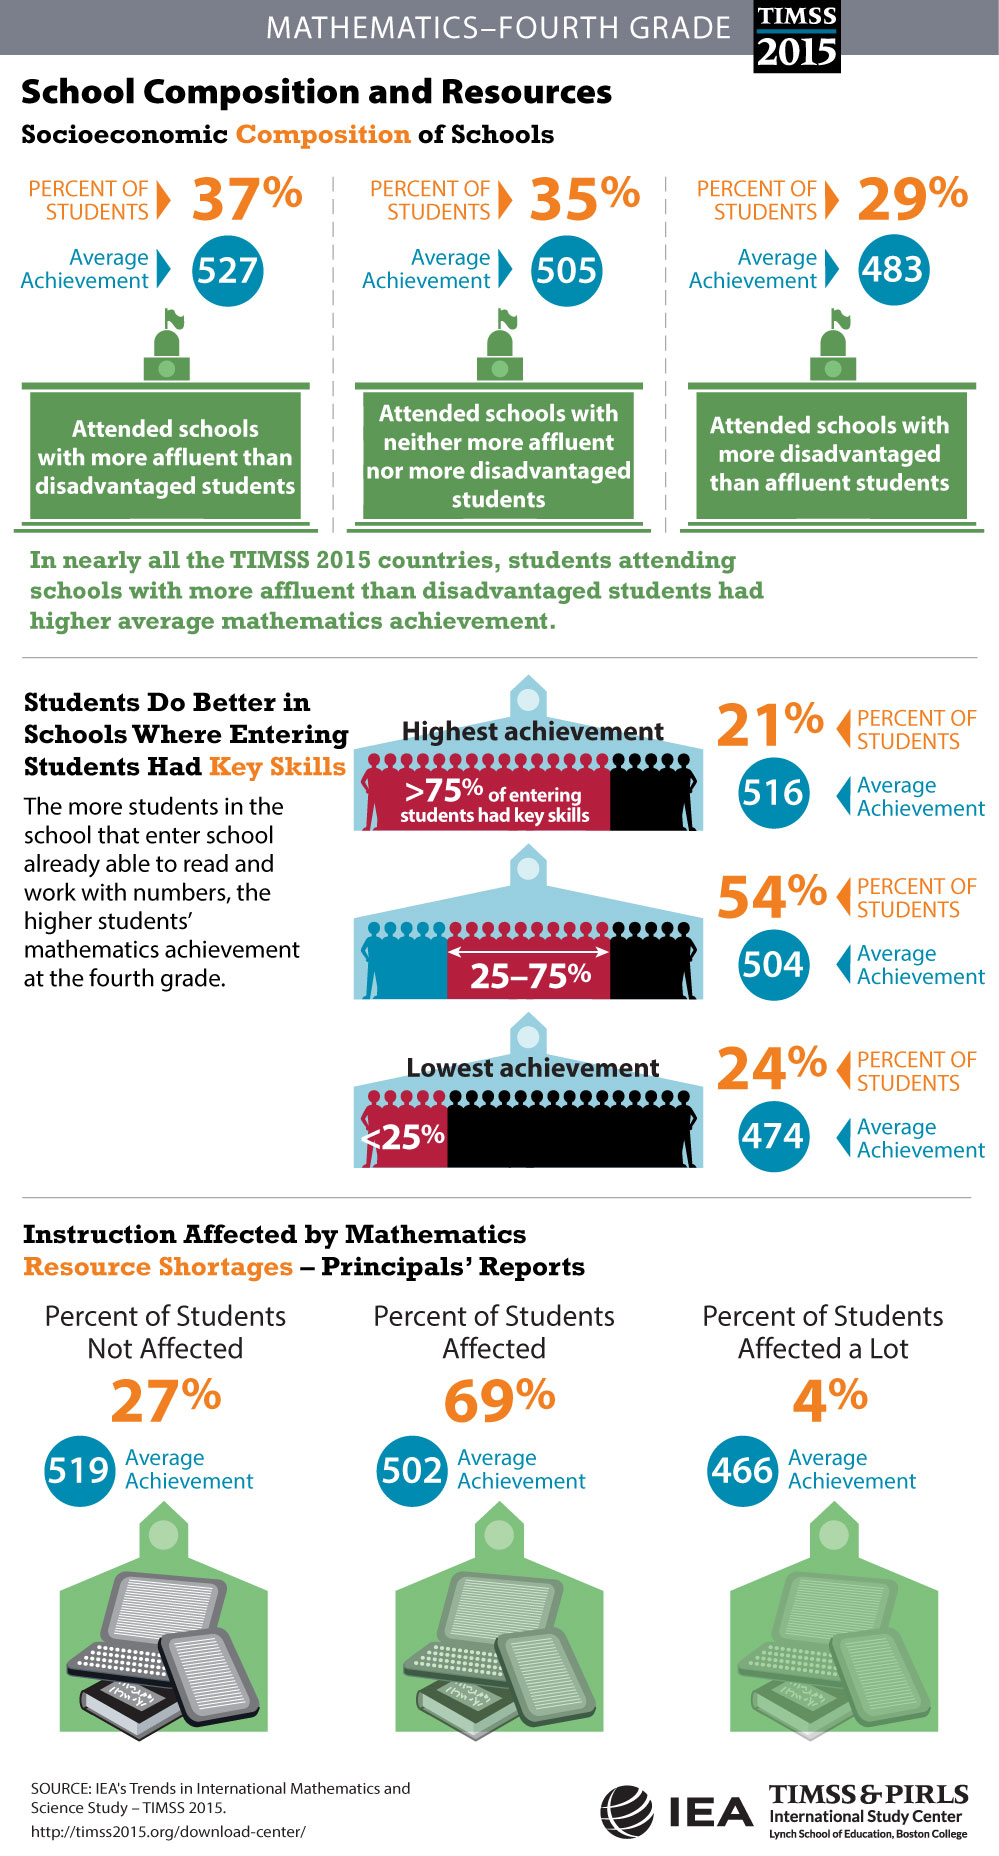 School Composition and Resources (G4) Infographic